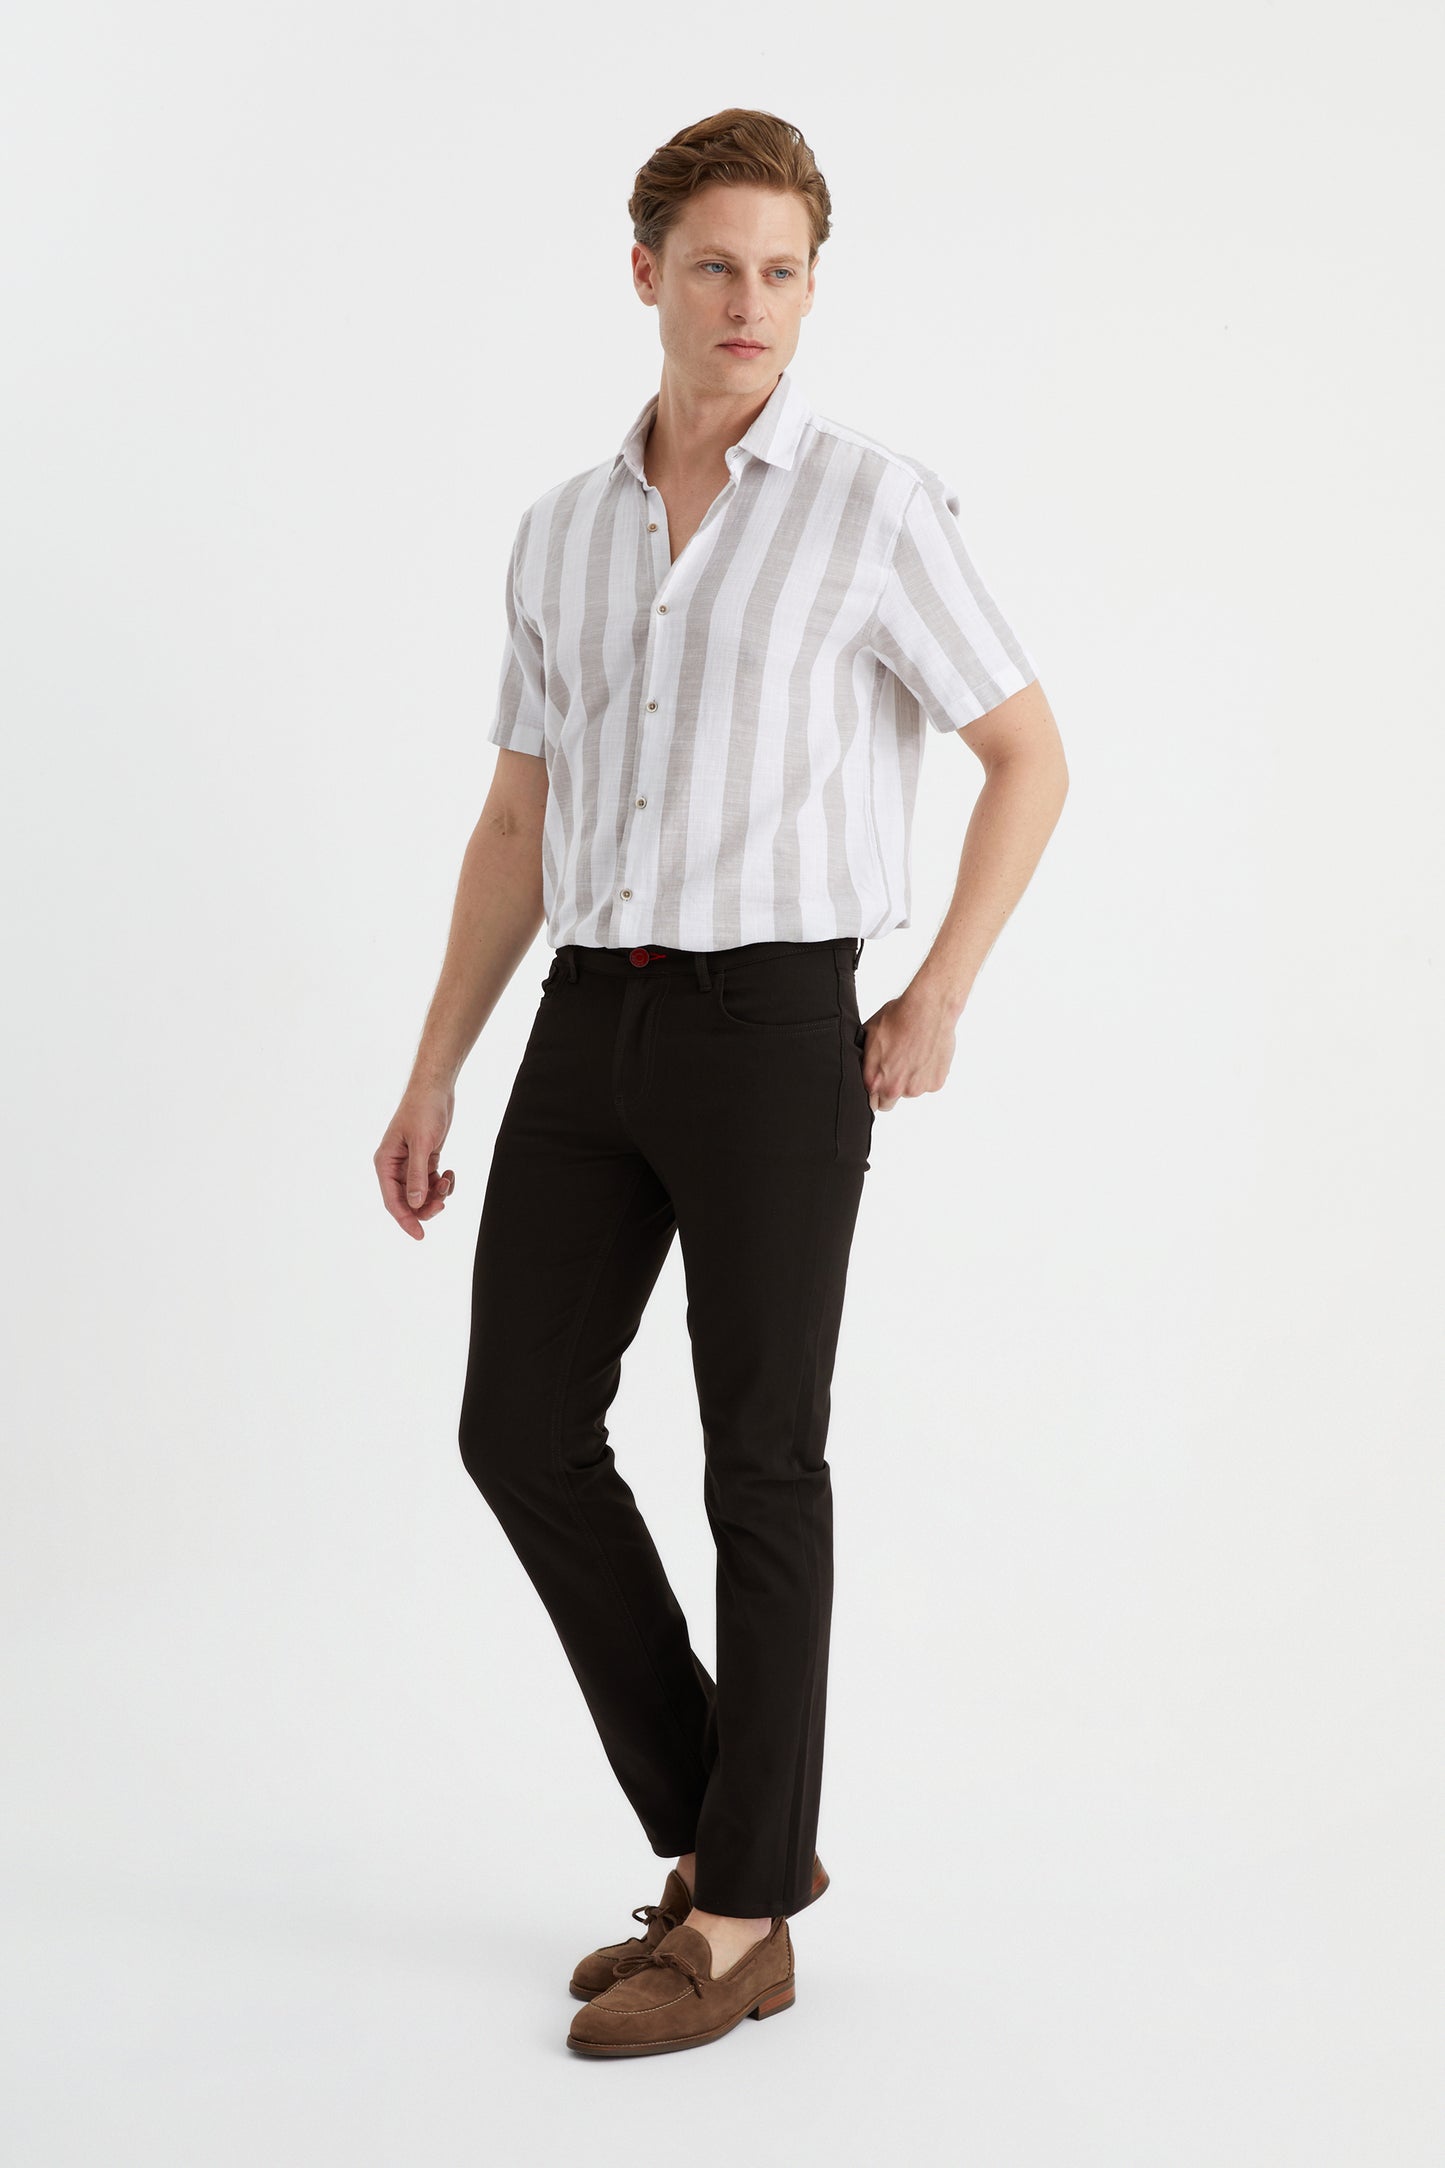 DFR89 men's slim coffee brown dress pants. Wrinkle resistant and stretchy, for the ultimate combination of style and comfort.